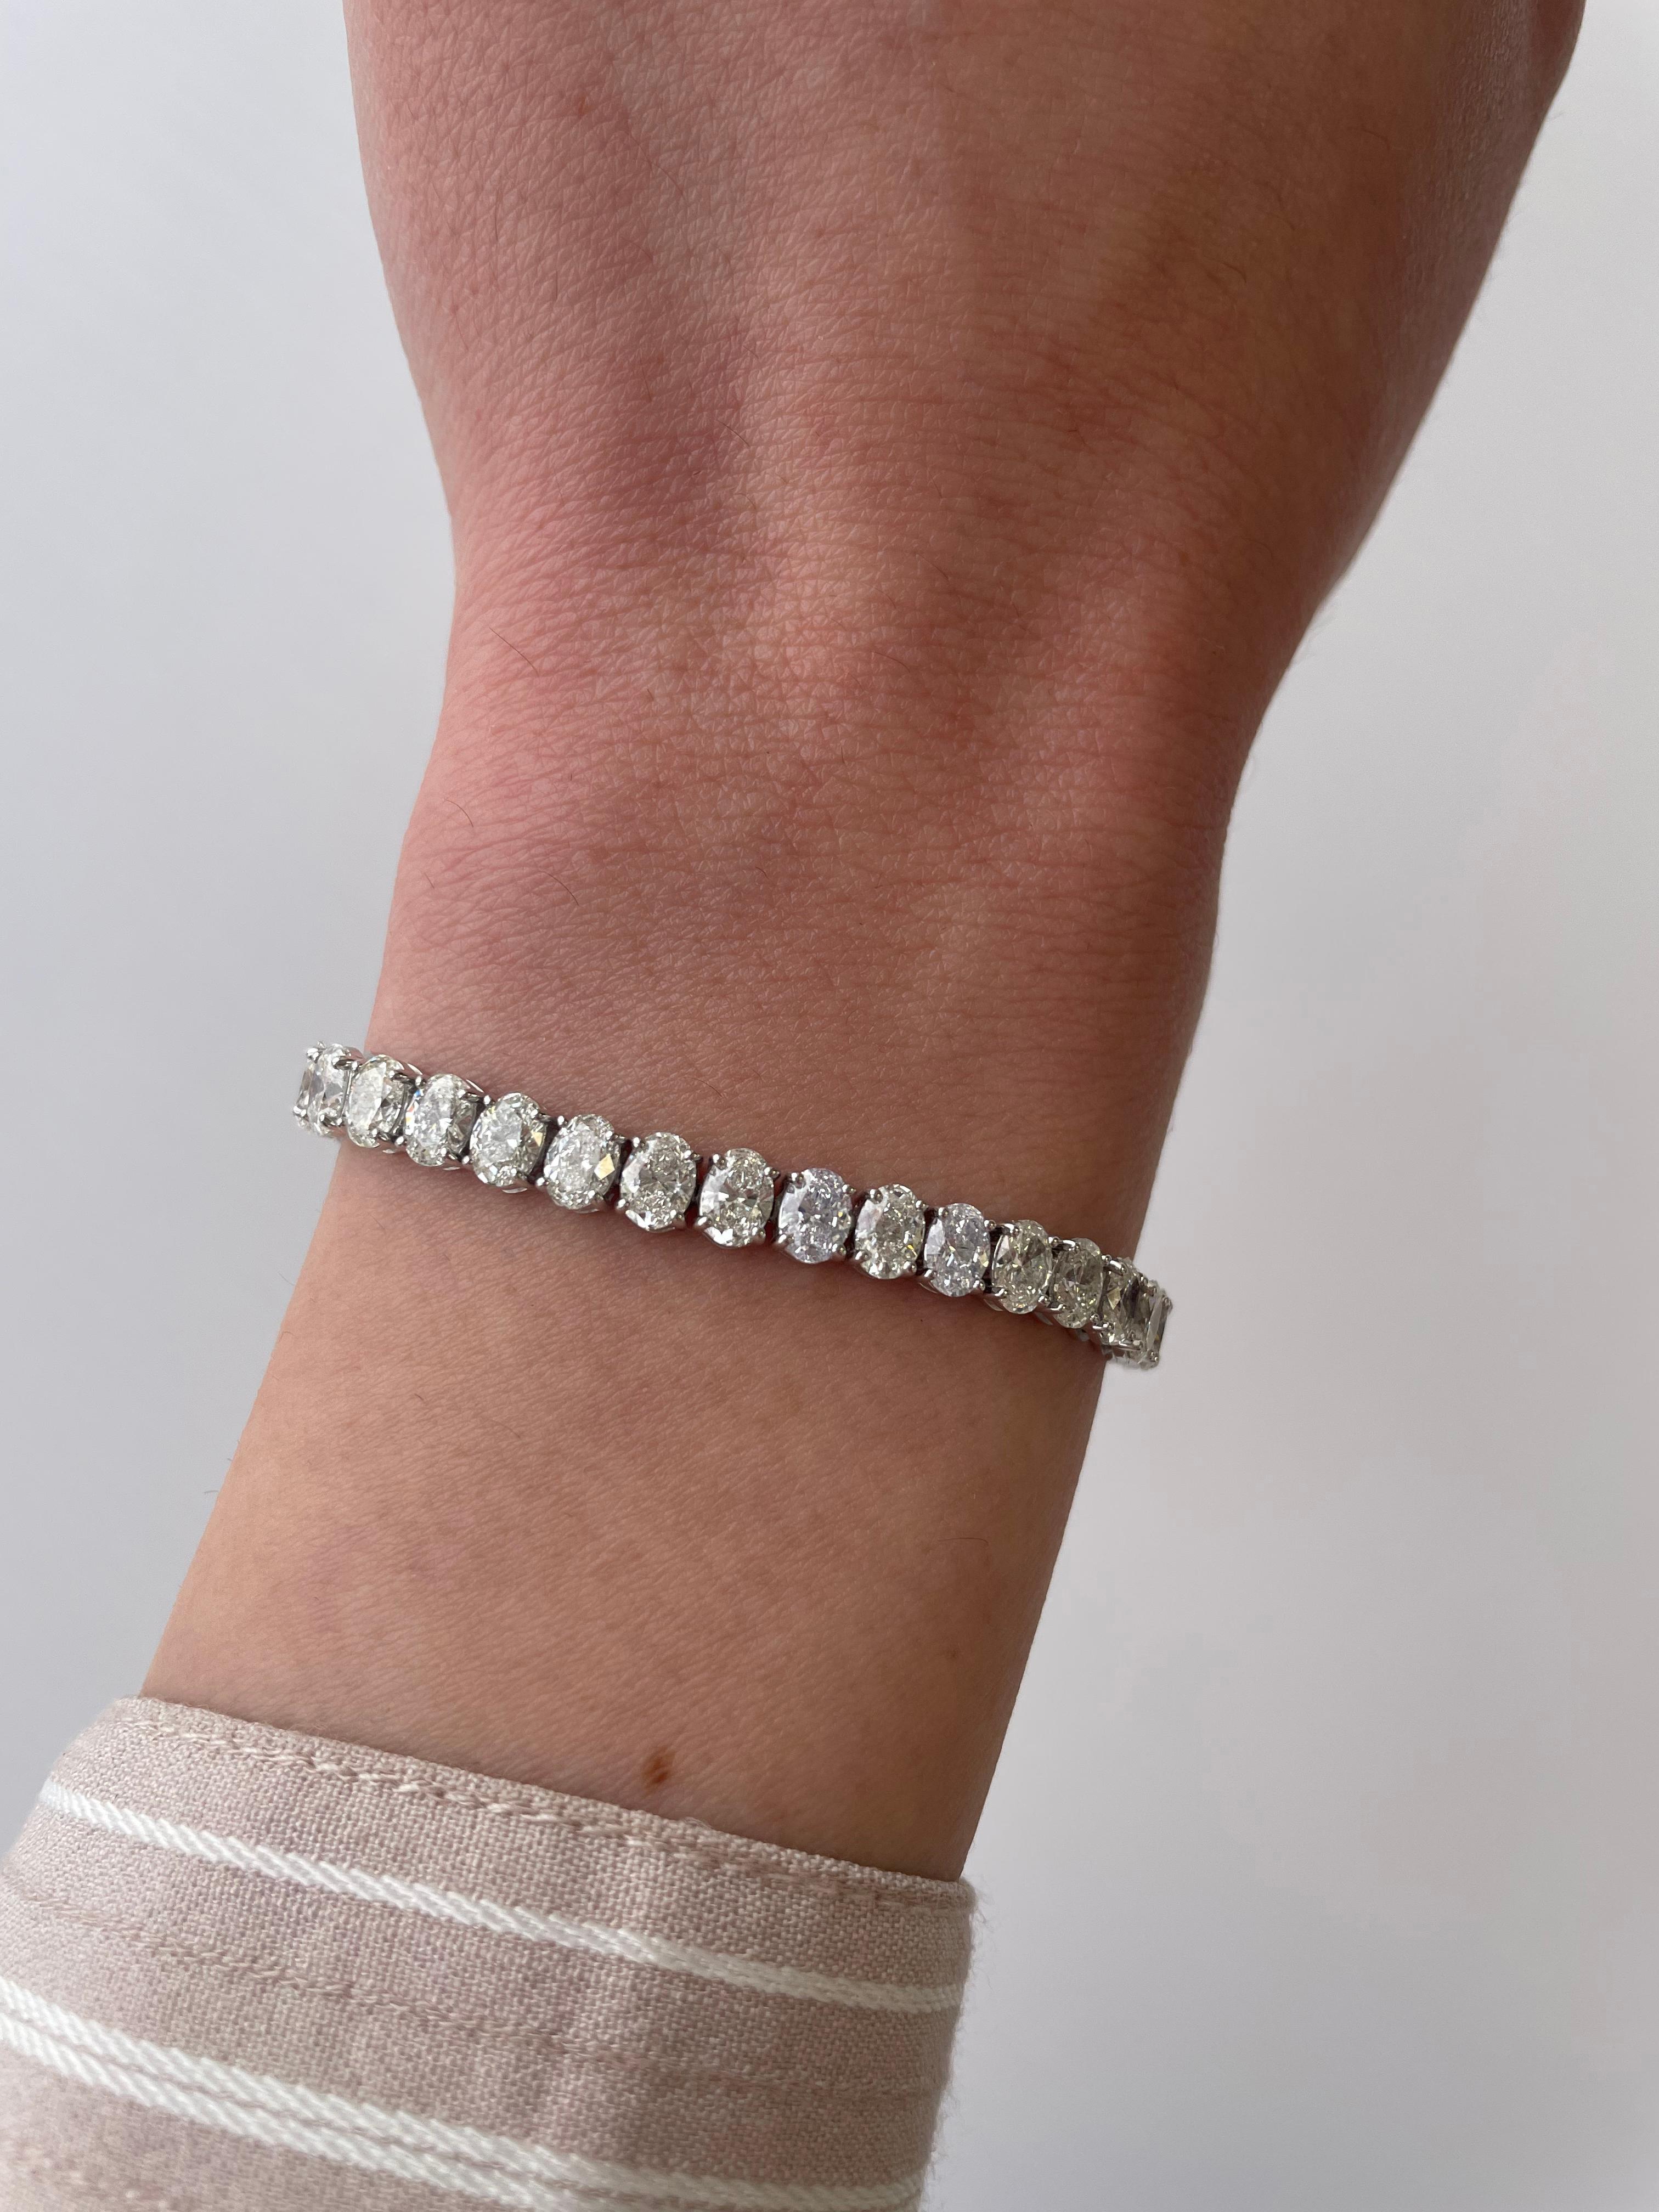 Stunning modern straight oval cut diamond tennis bracelet. High jewelry by Alexander Beverly Hills.
45 oval cut diamonds, 13.65 carats. Approximately H color and SI1 clarity. 18k white gold, 18.17 grams, 7 inches.
Accommodated with an up-to-date